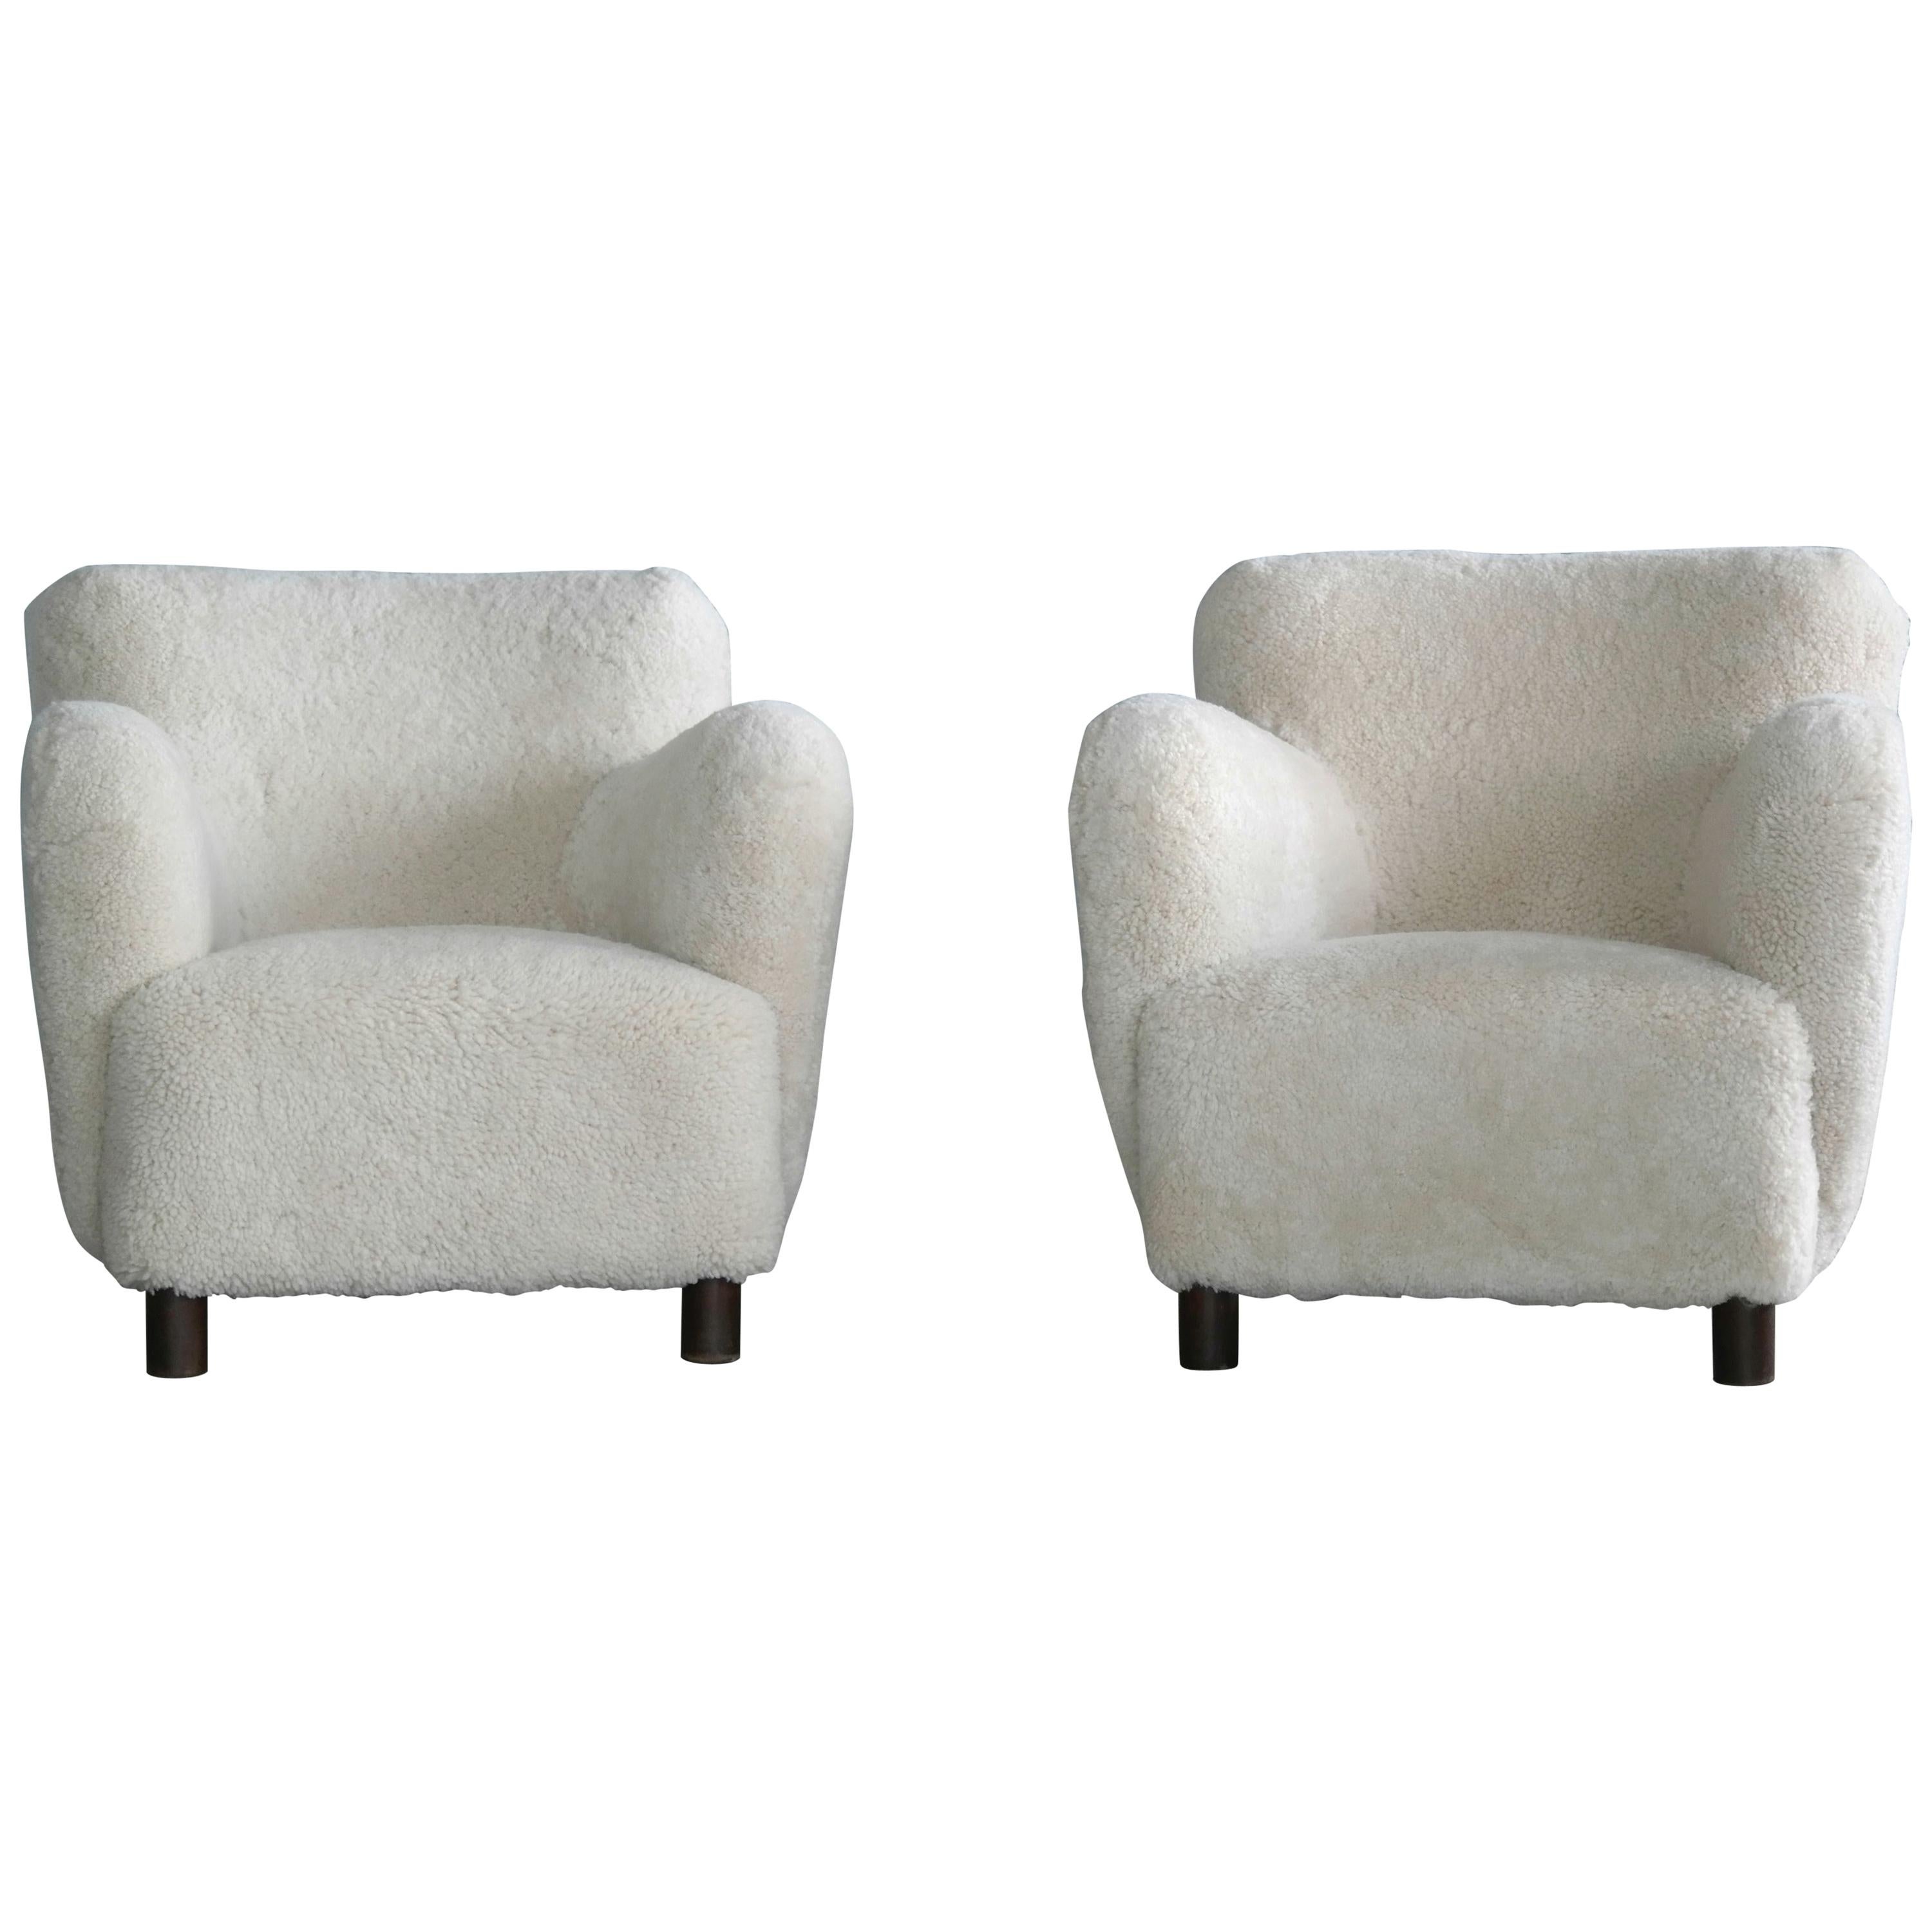 Sheepskin Pair of Club Chairs Attributed to Flemming Lassen Denmark, 1940s